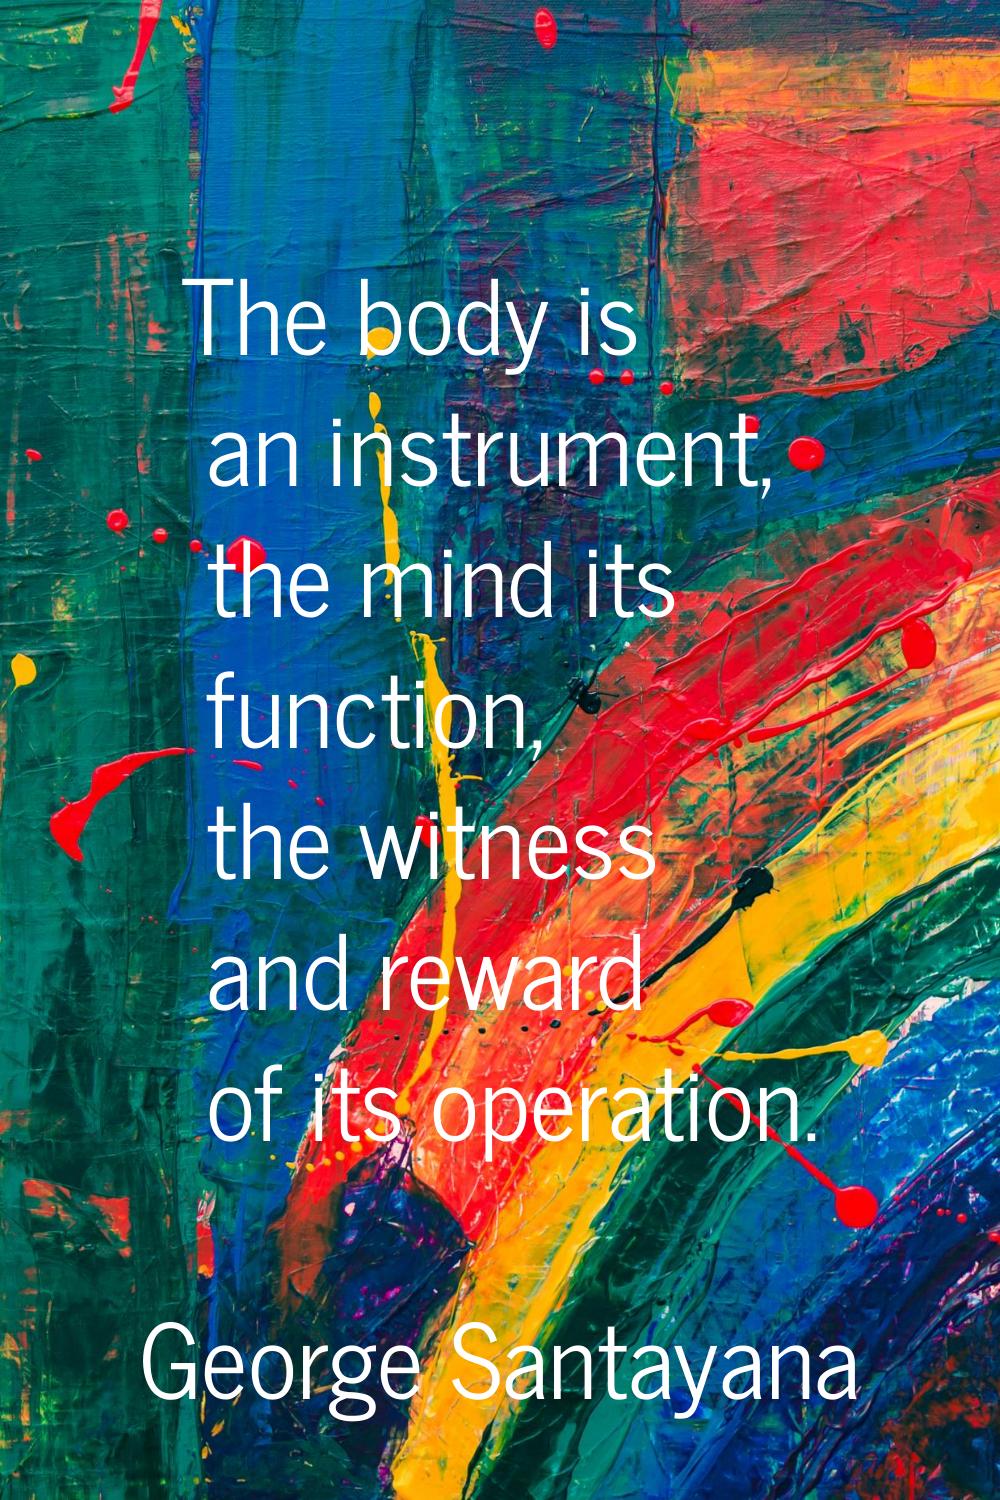 The body is an instrument, the mind its function, the witness and reward of its operation.